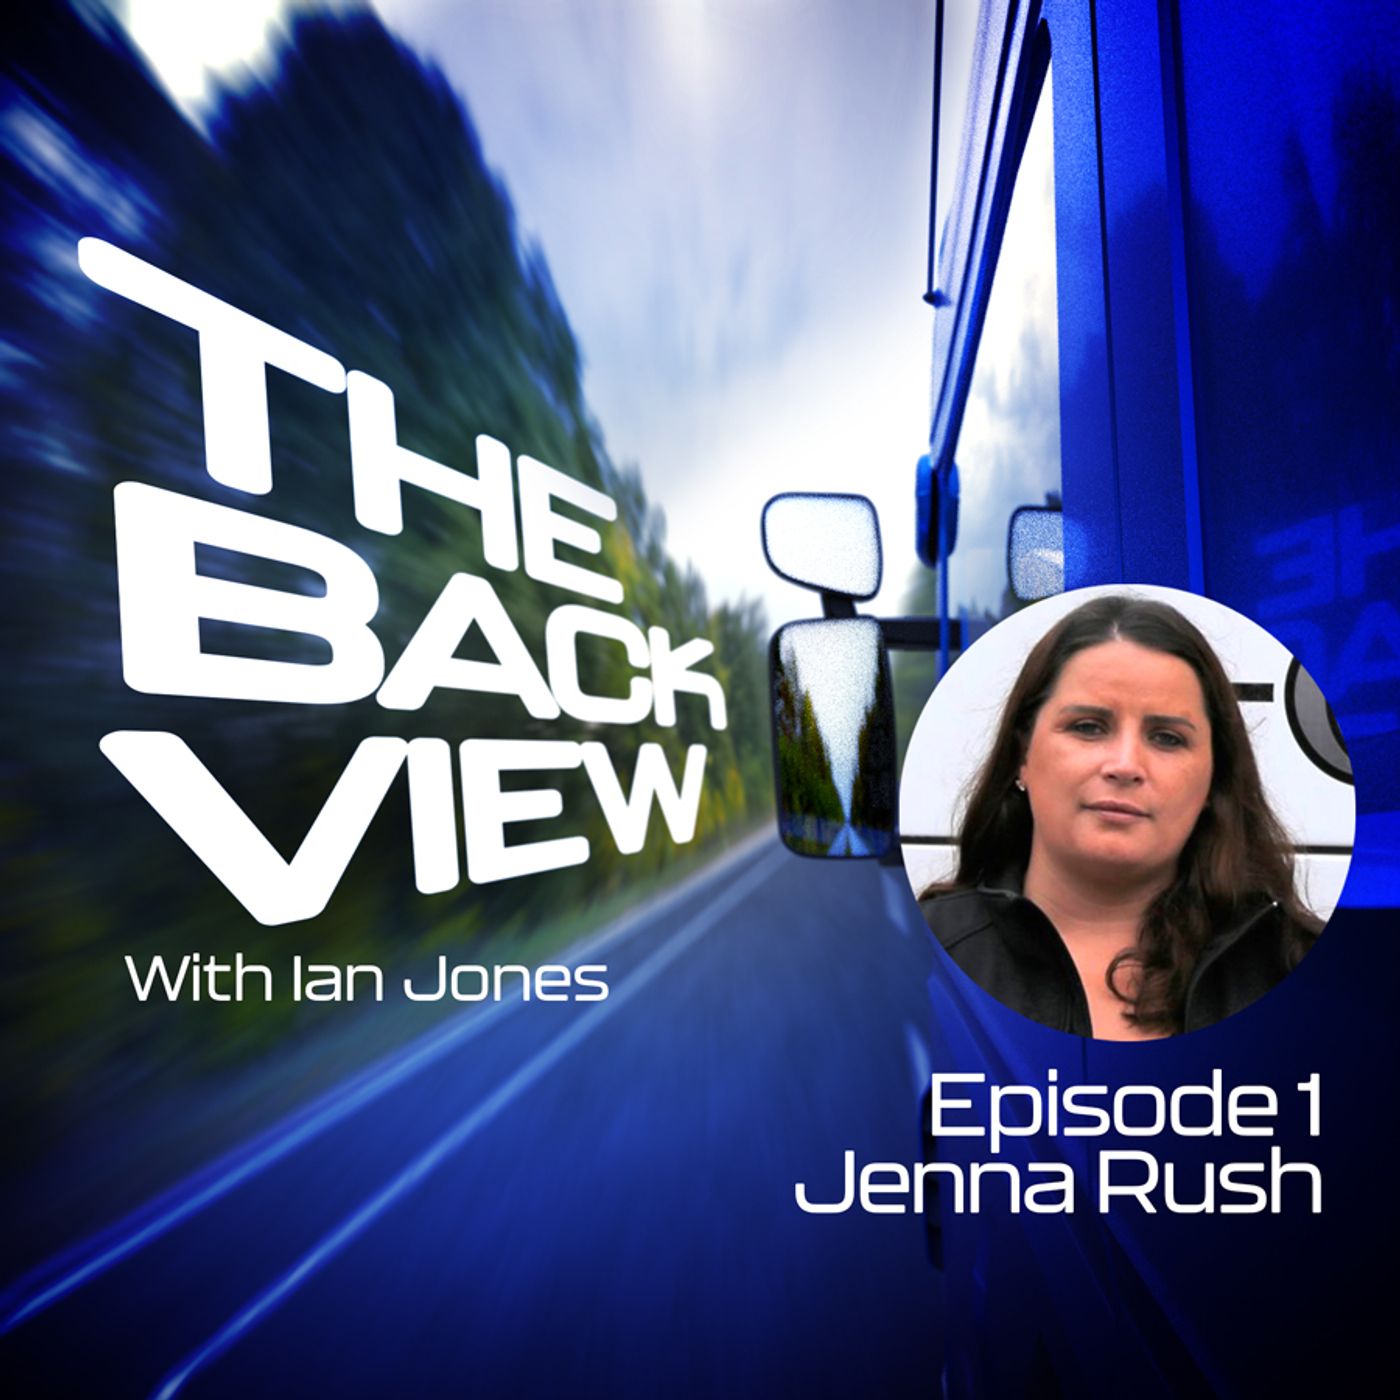 1: The Back View episode 1 - Jenna Rush